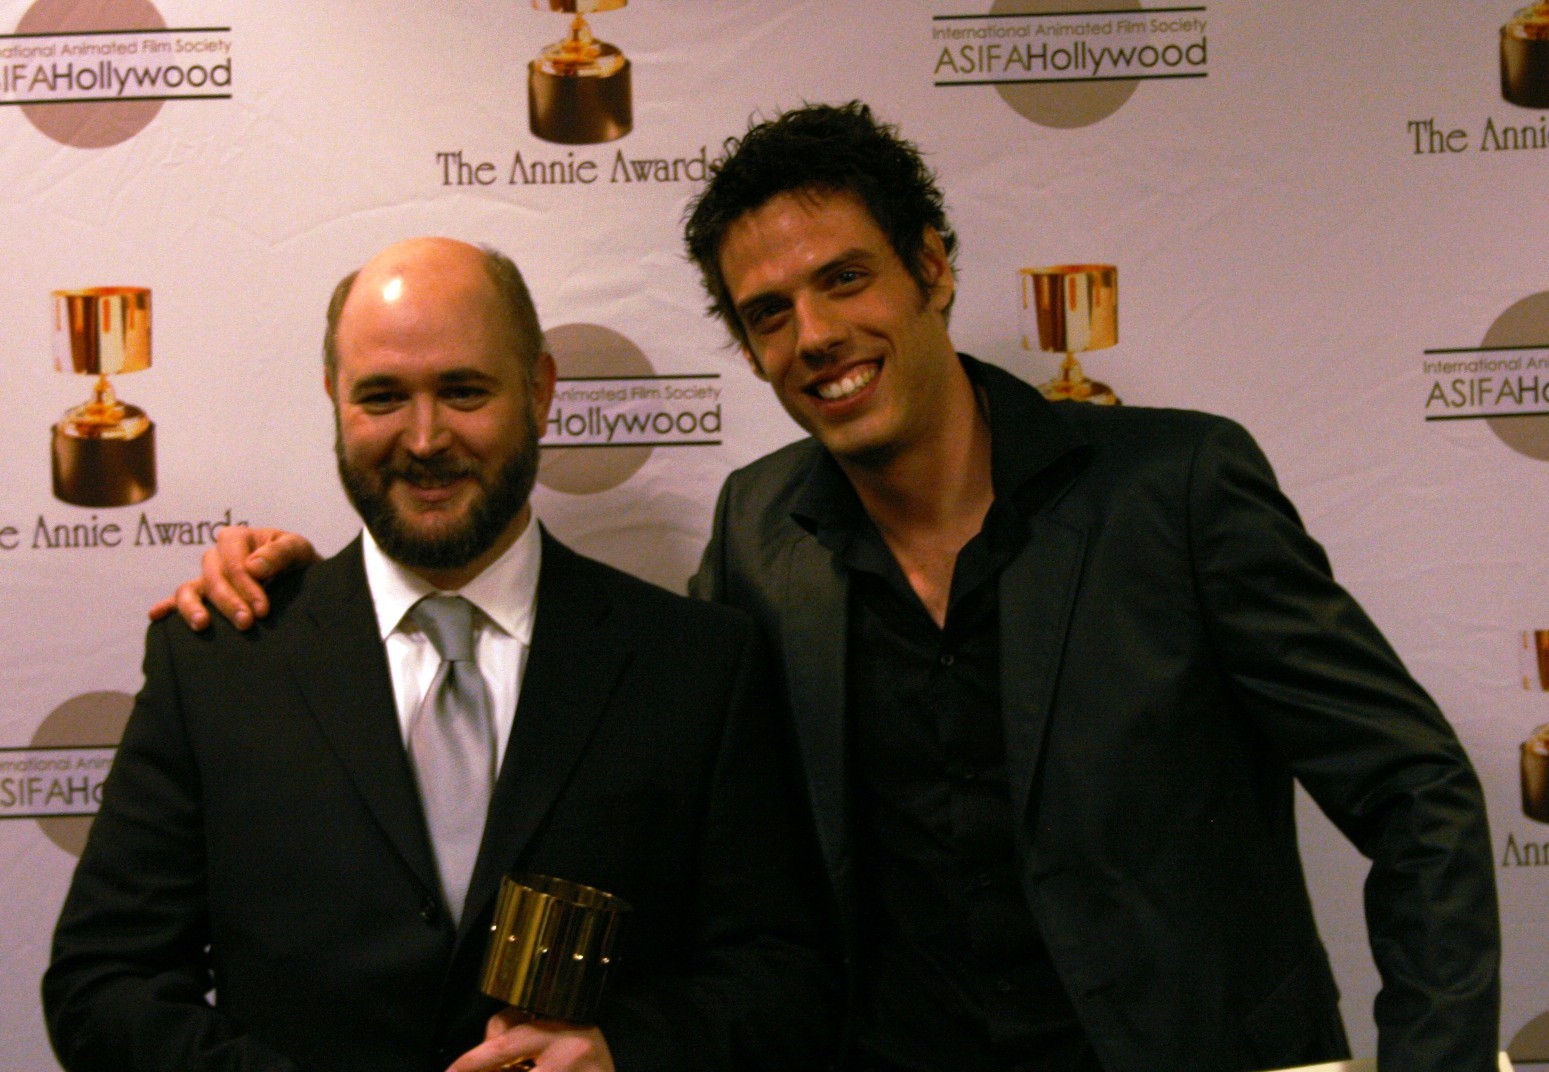 James Baxter and Pierre Perifel at event of Kung Fu Panda (2008)